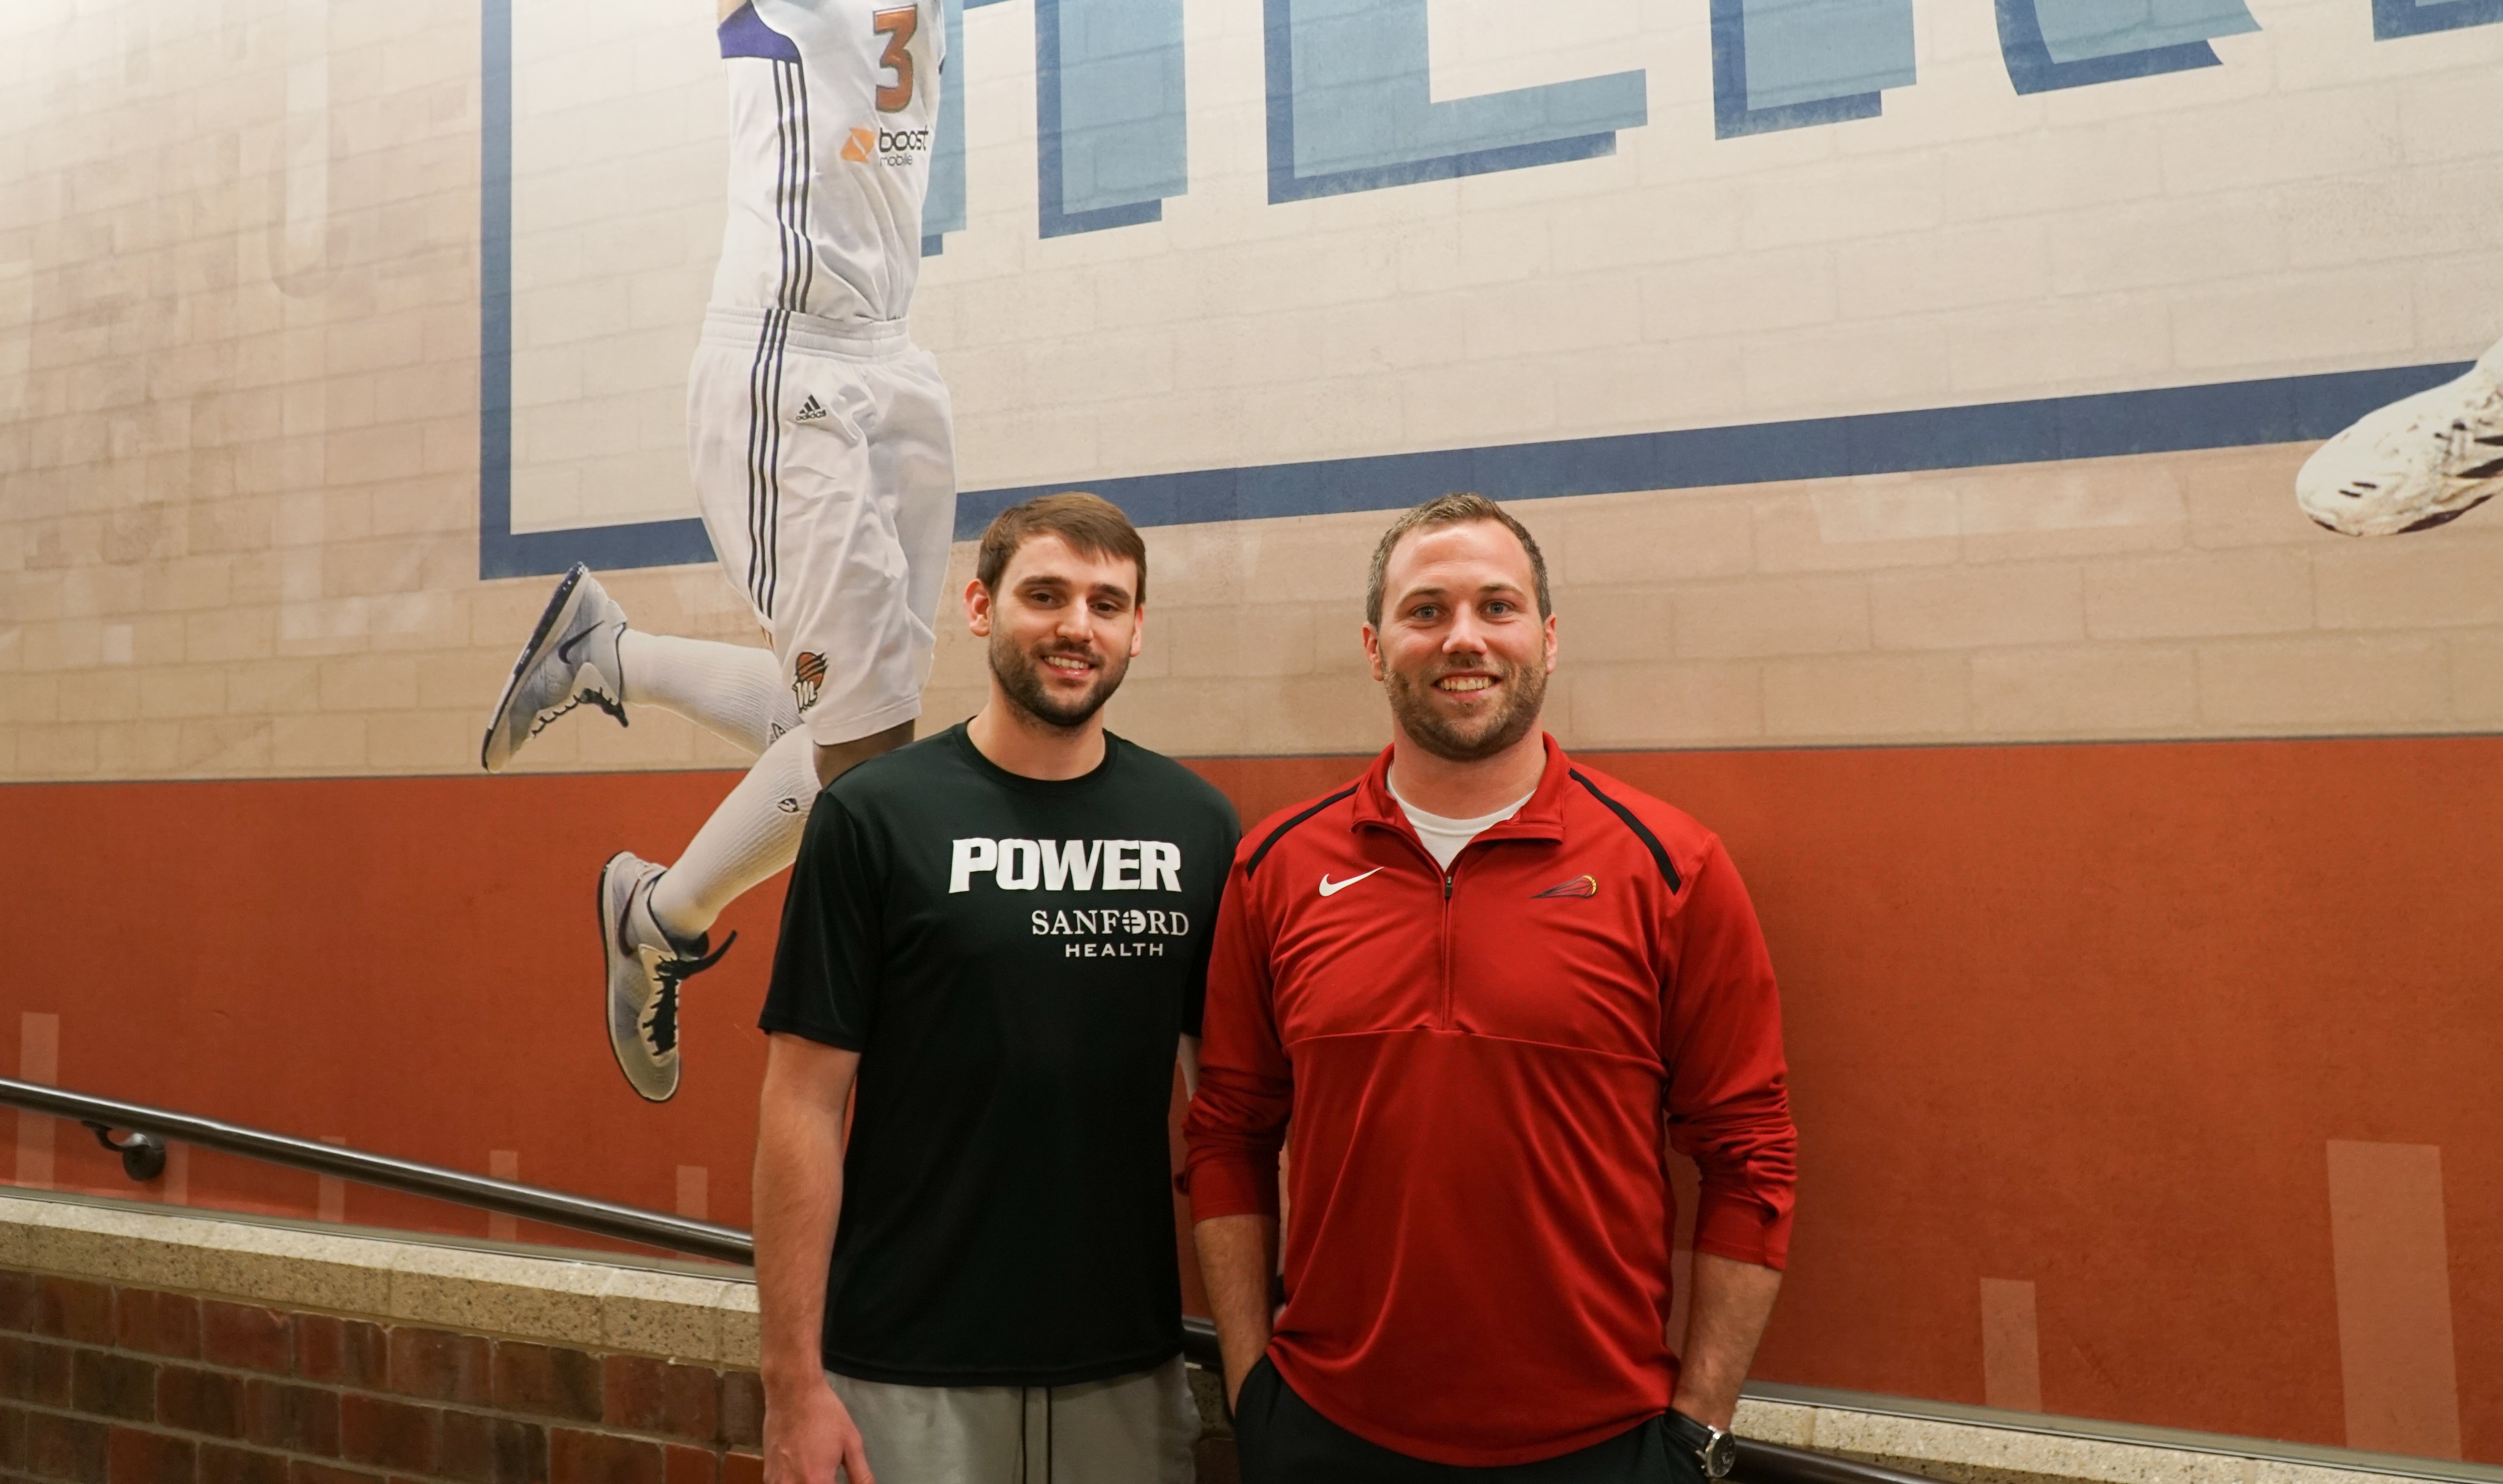 Two Sanford Health employees smile while standing against a gym wall with a basketball mural painted on it.